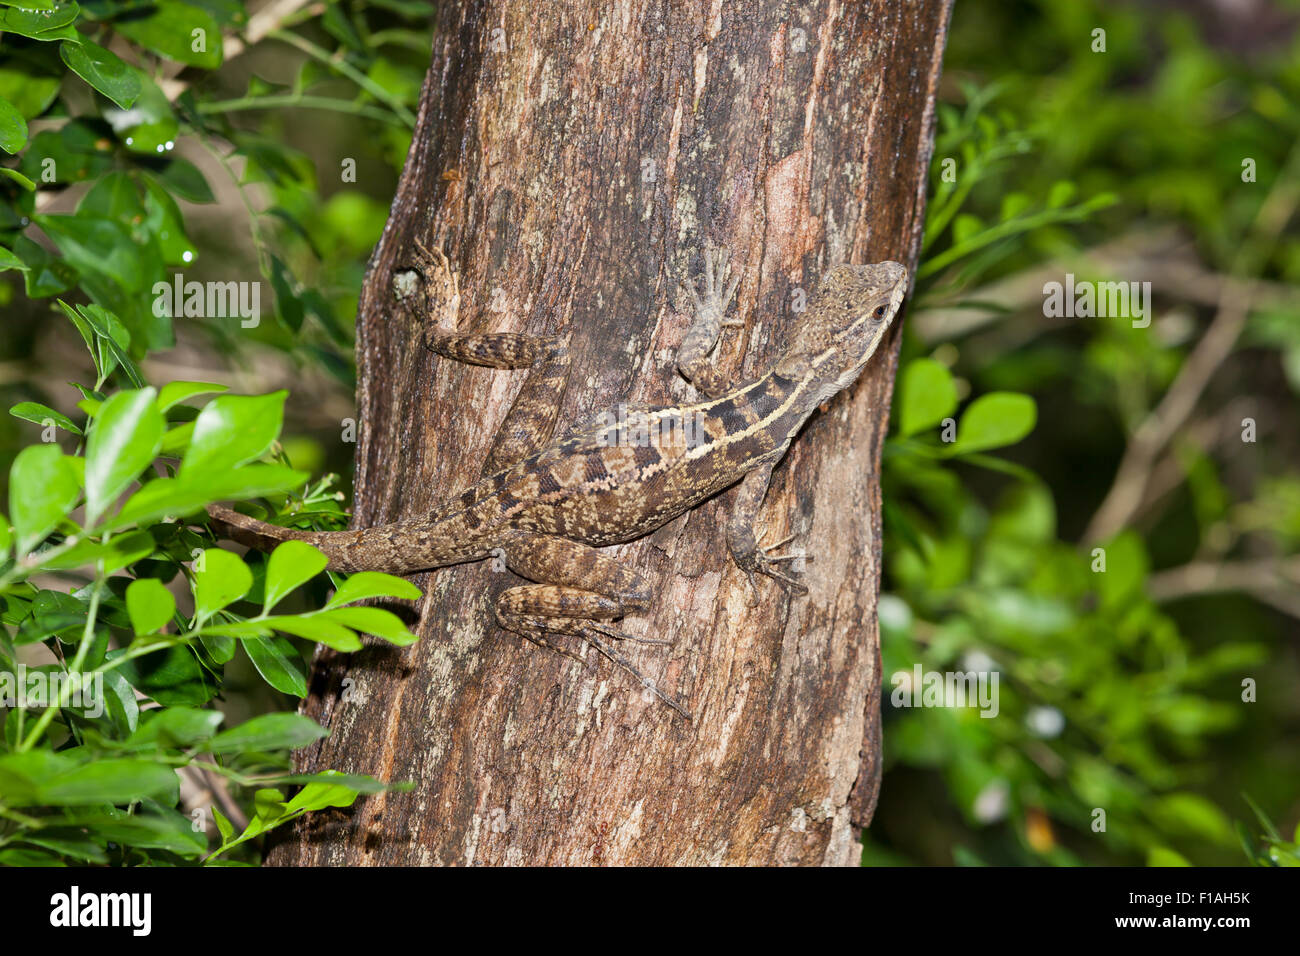 A brown patterned lizard blends in with the colors of a tree trunk that he is climbing up with his long sharp claws. Stock Photo